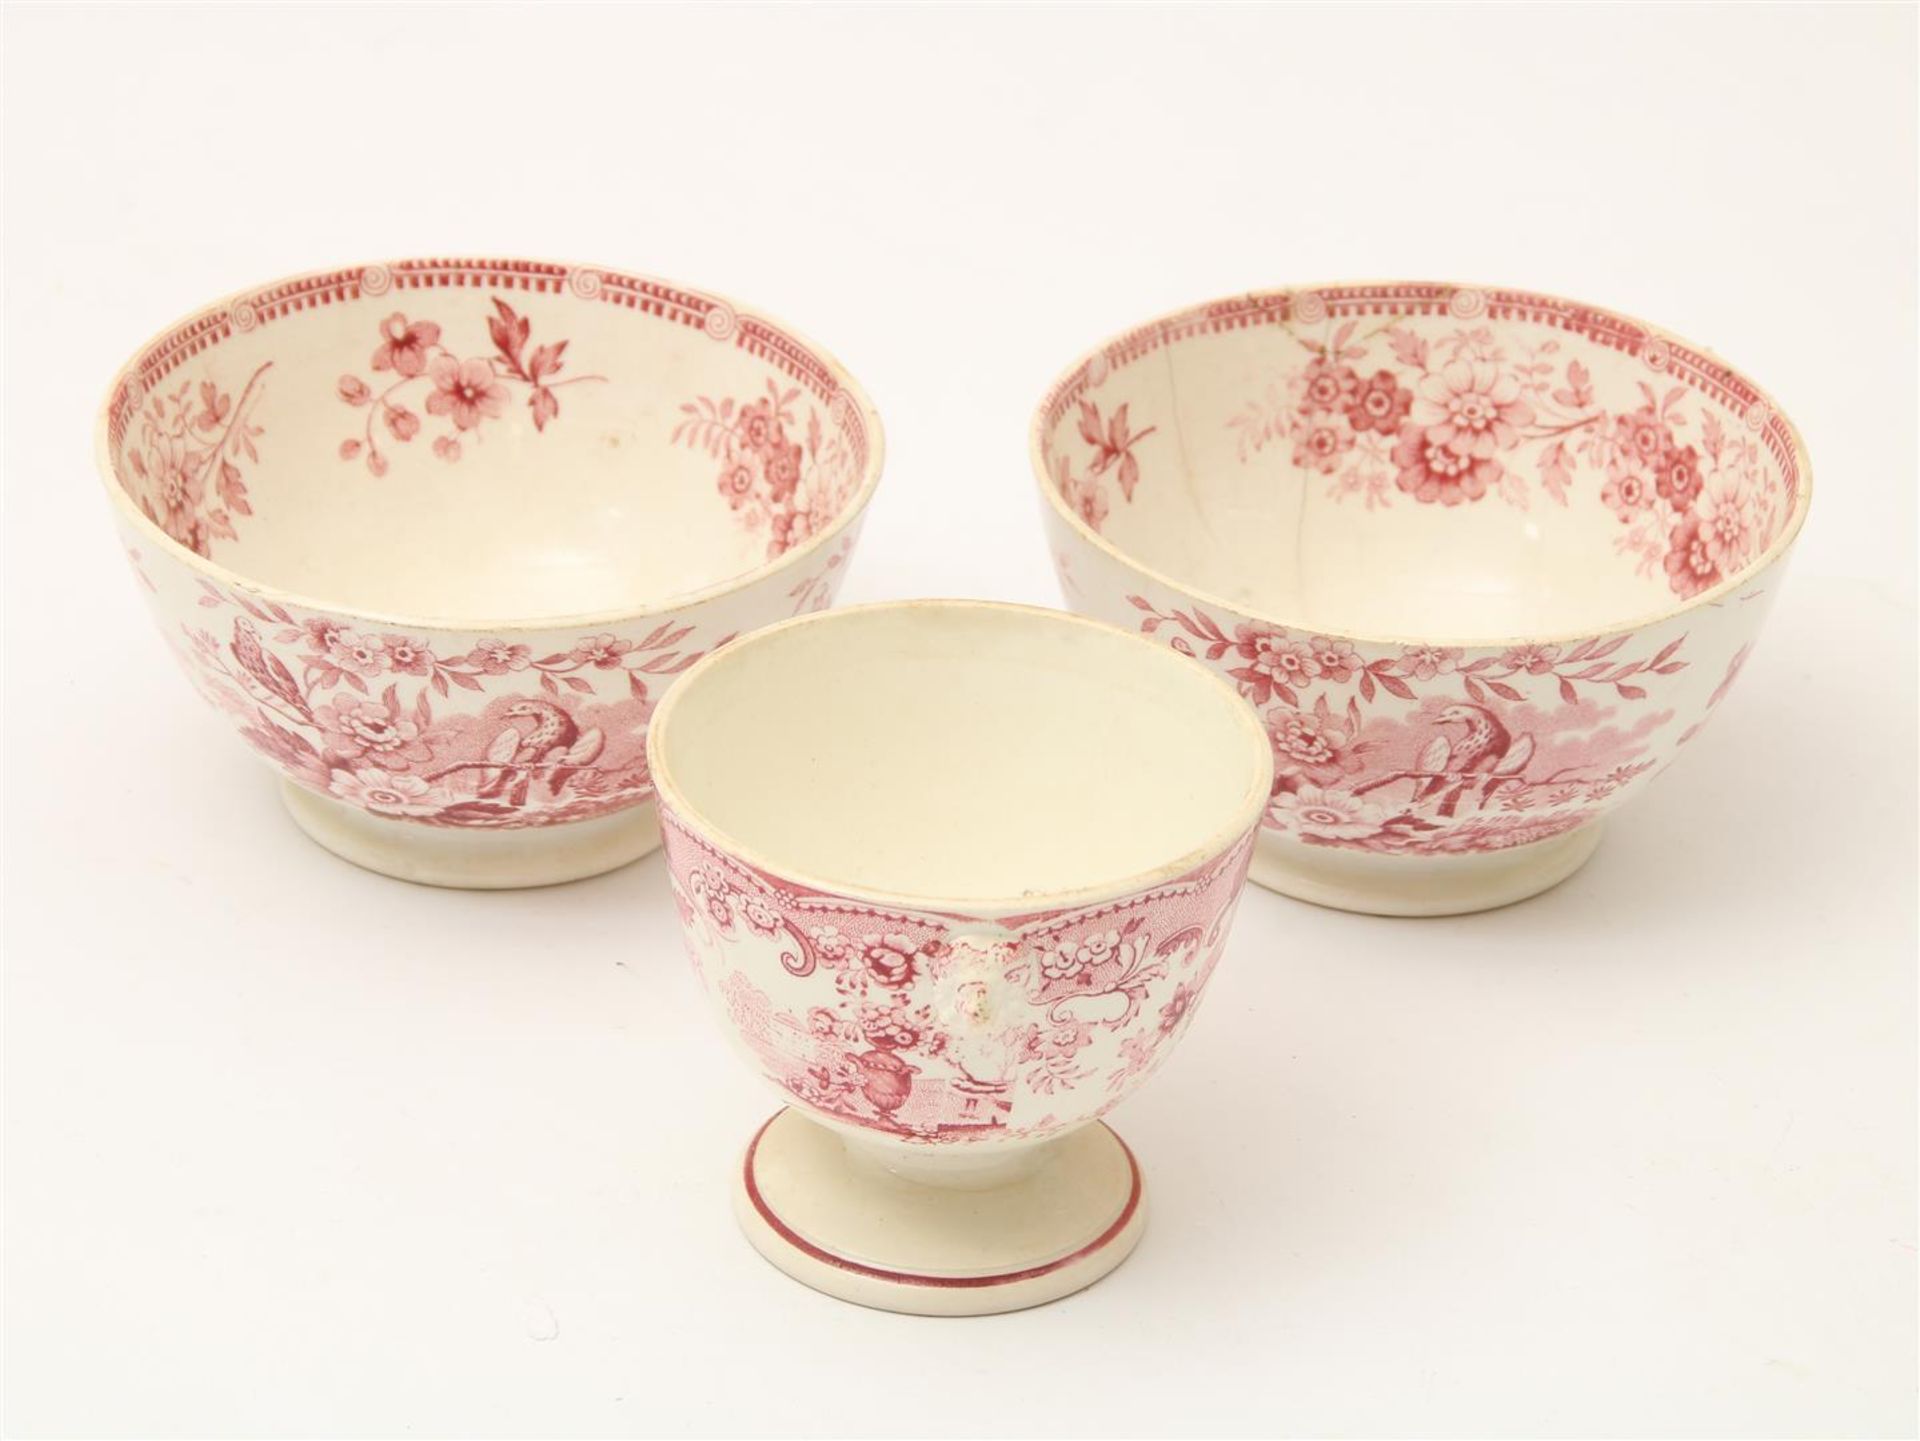 Lot of 5 earthenware cups and saucers, marked Petrus Regout ca. 1855-1880, 5 earthenware cups and - Image 8 of 16